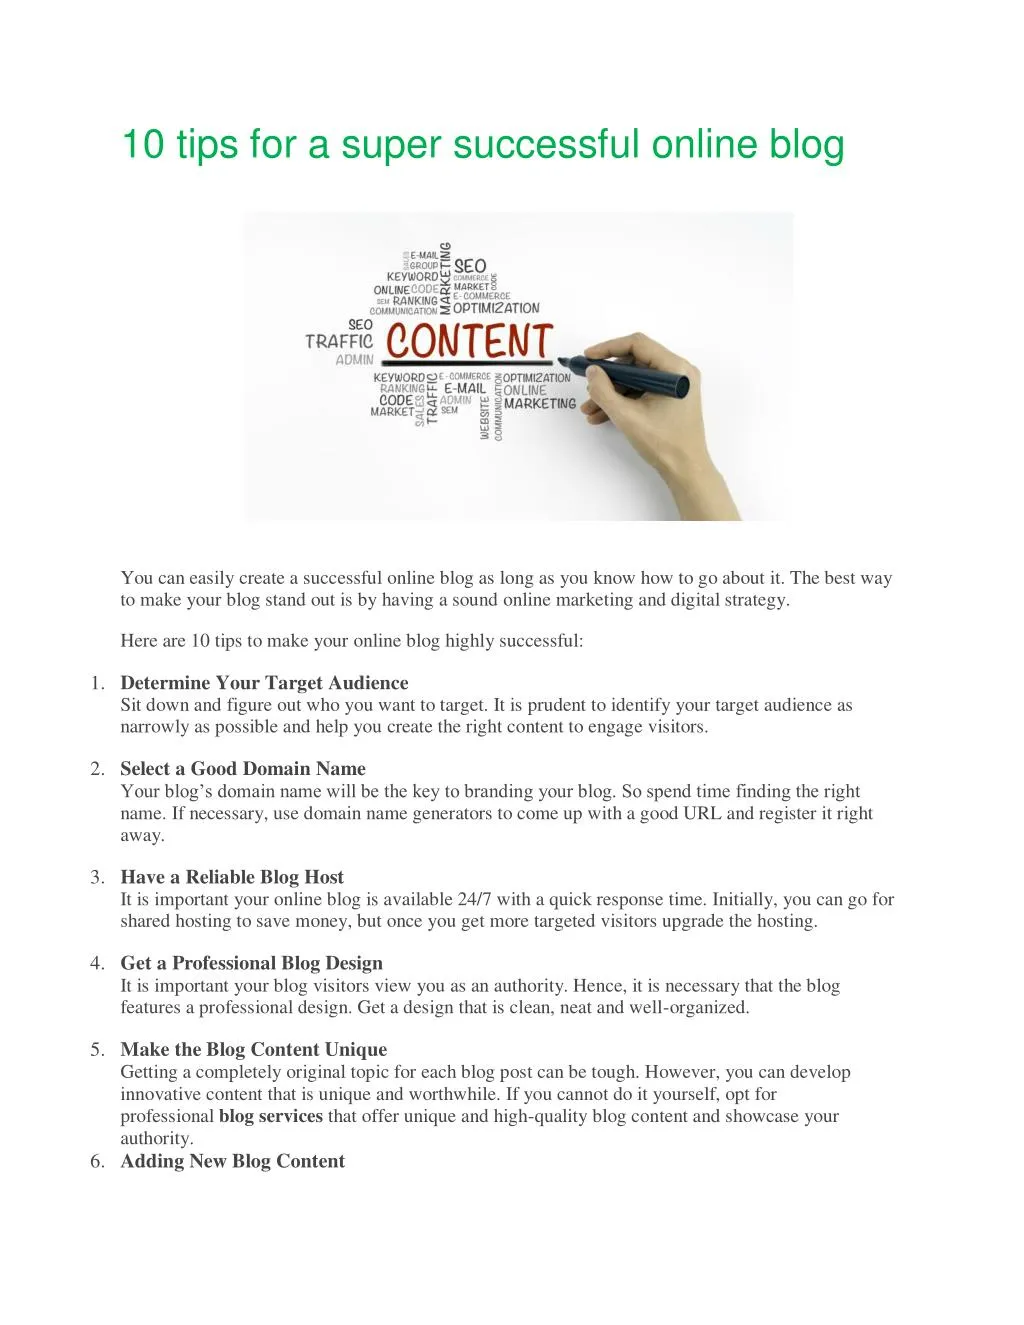 10 tips for a super successful online blog